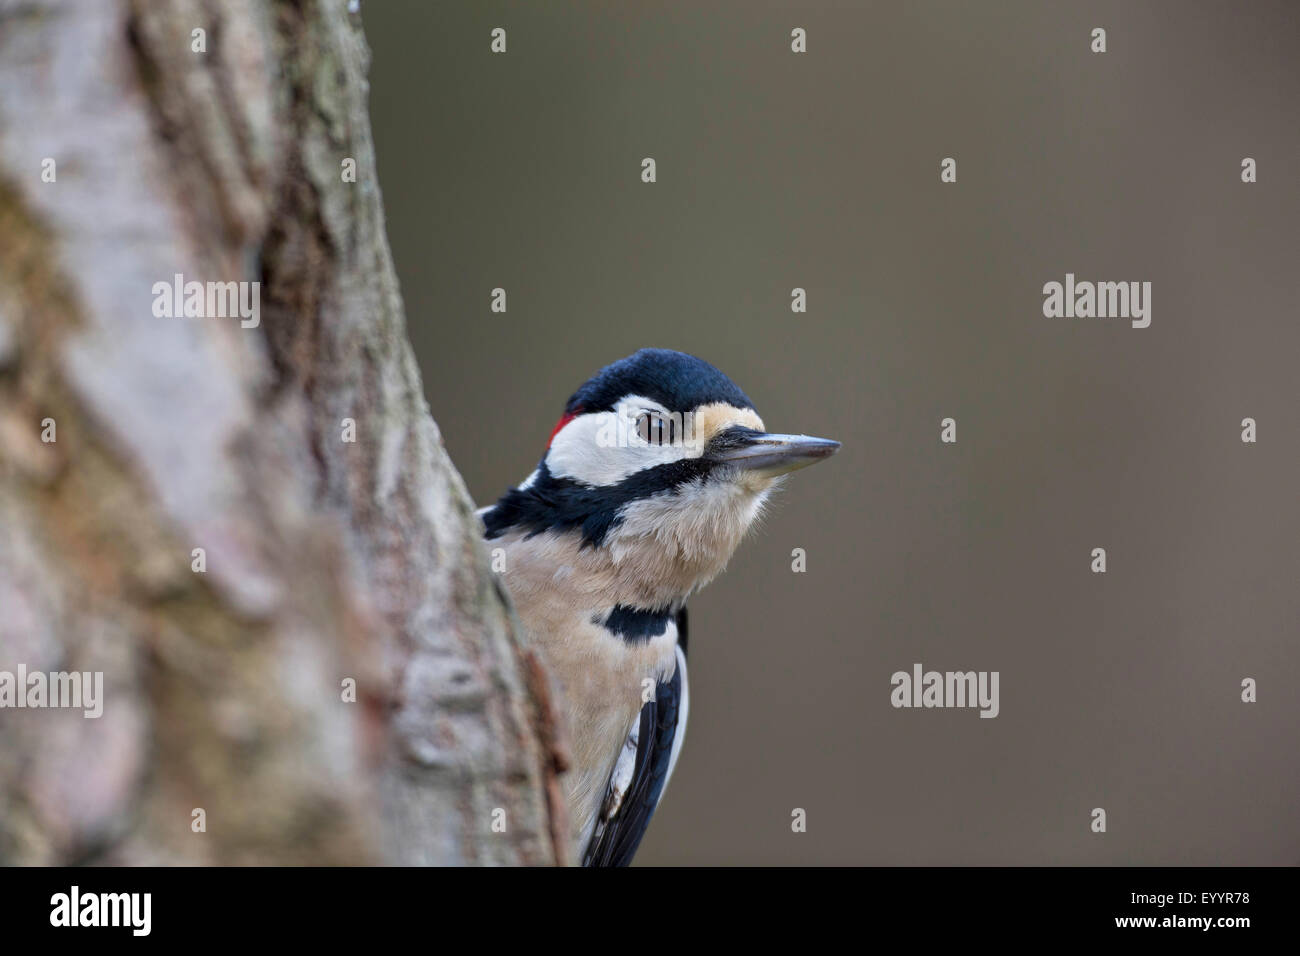 Great spotted woodpecker (Picoides major, Dendrocopos major), male searching food at a tree trunk, Germany Stock Photo